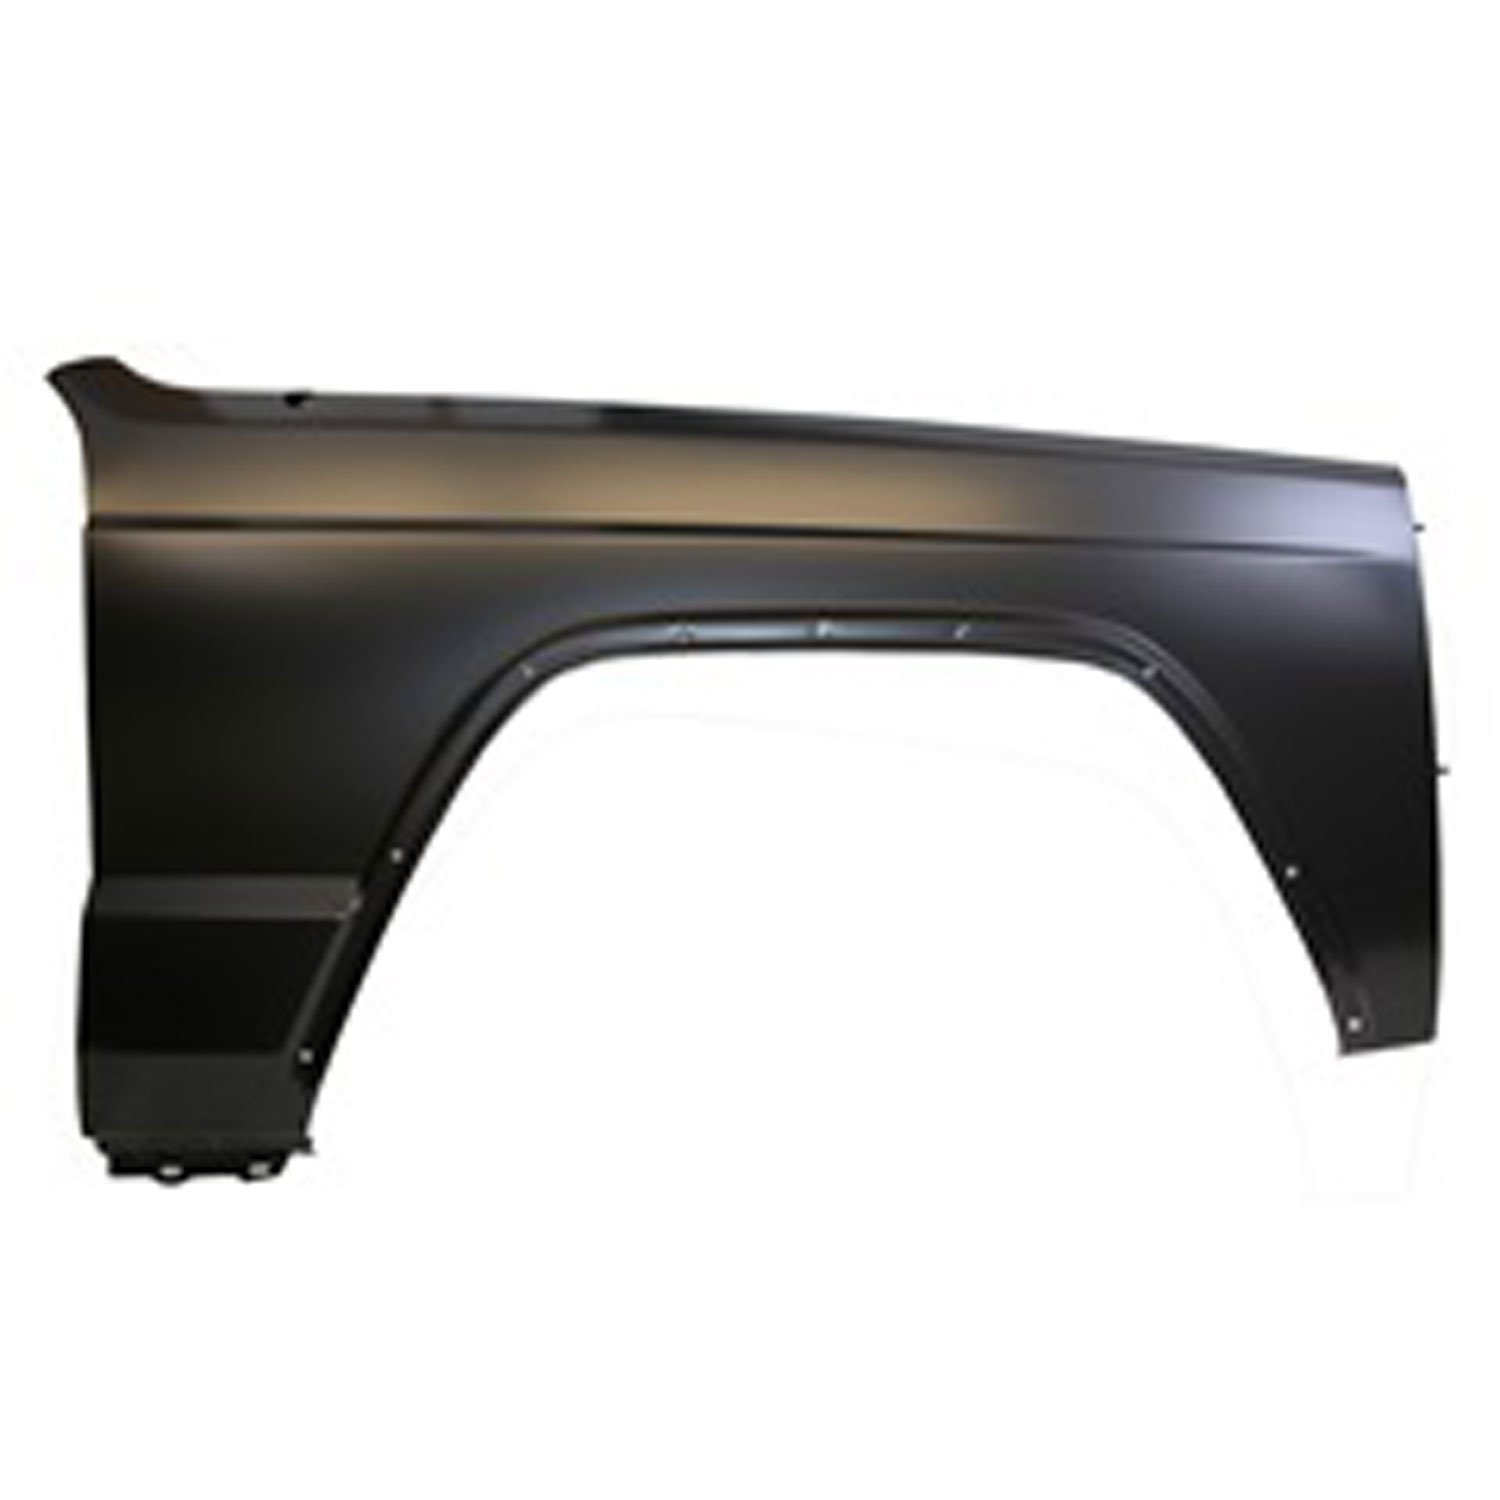 Replacement front fender from Omix-ADA, Fits right side on 84-96 Jeep Cherokee XJ